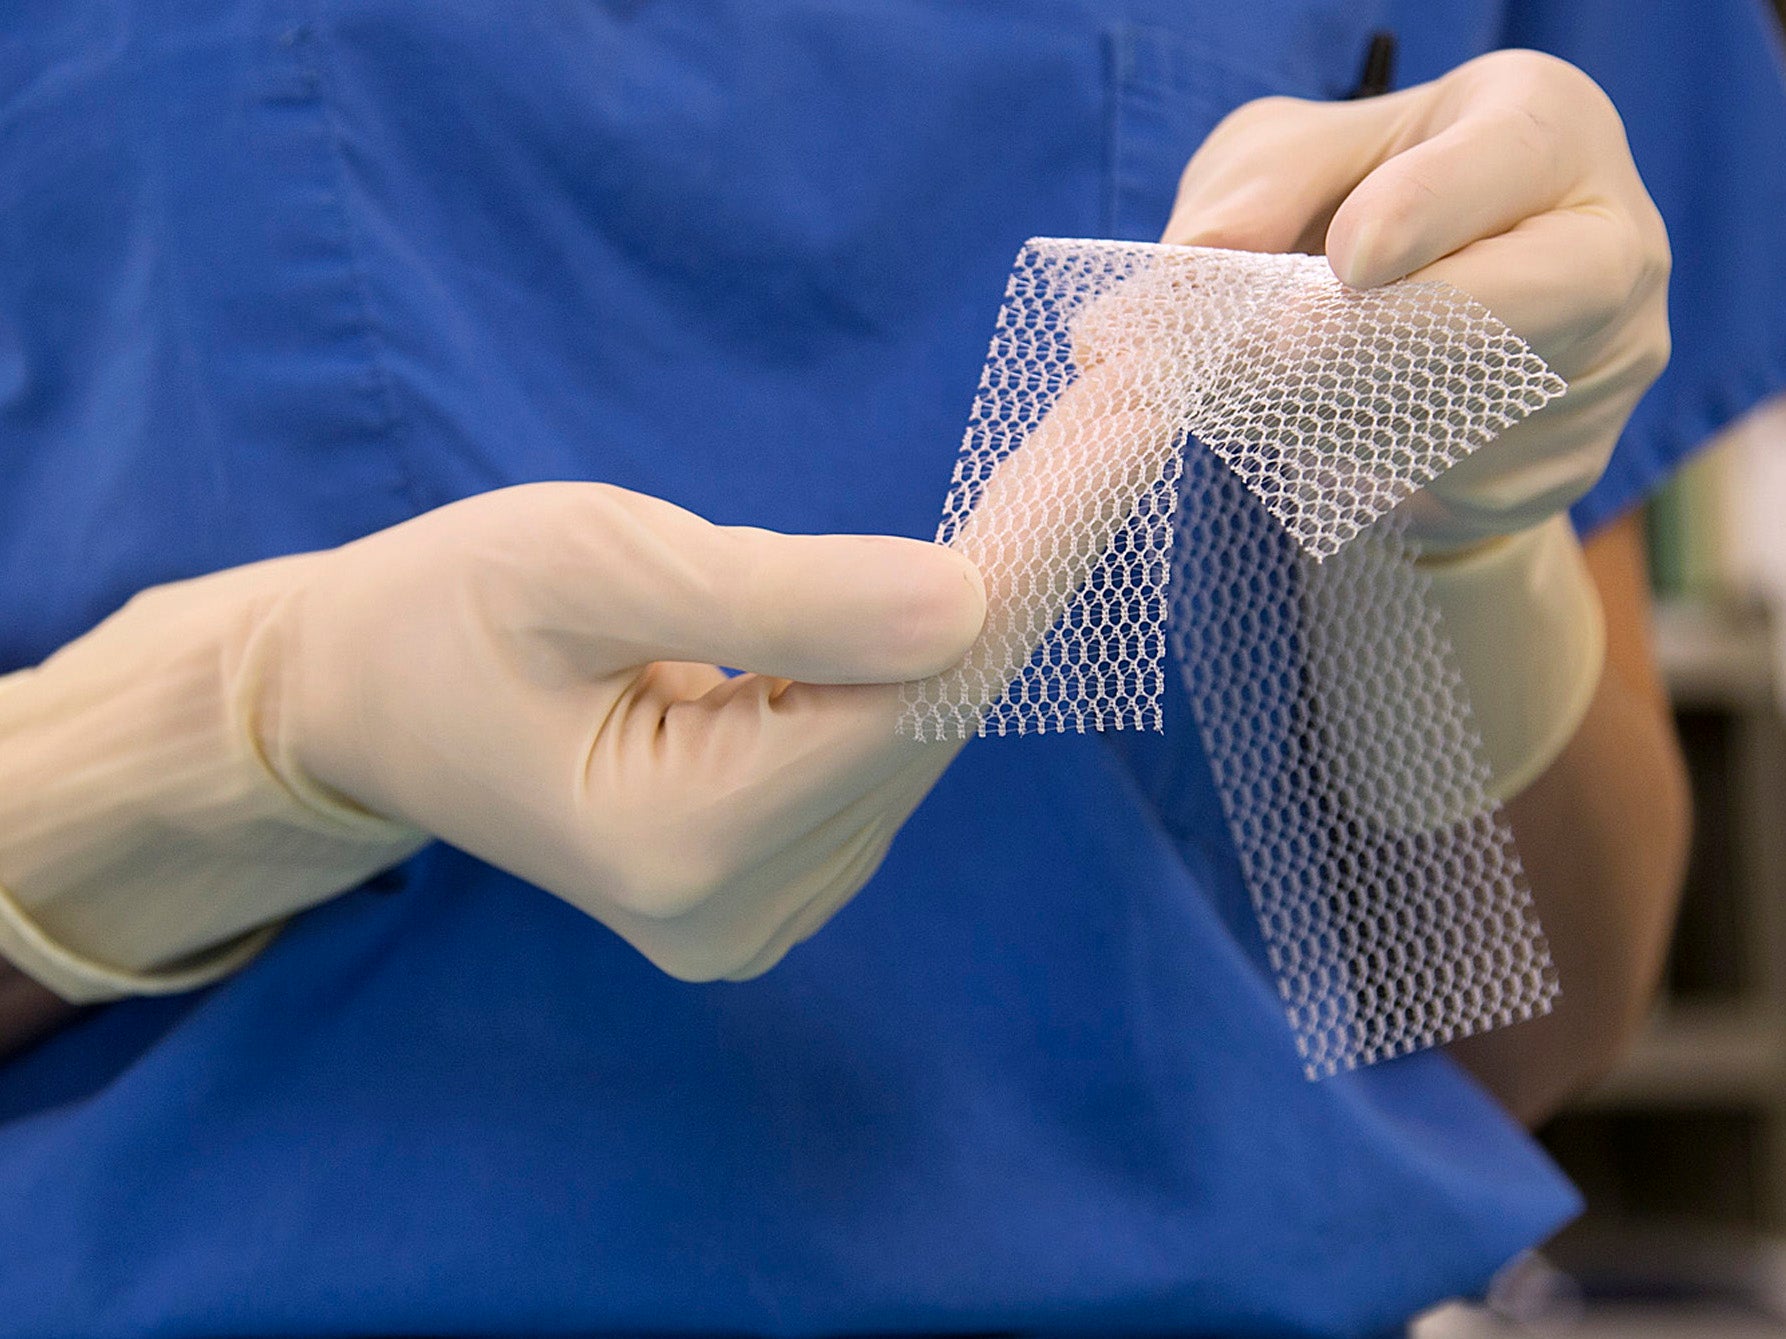 Vaginal Mesh New Material Which Avoids Serious Injuries And Side Effects Discovered By